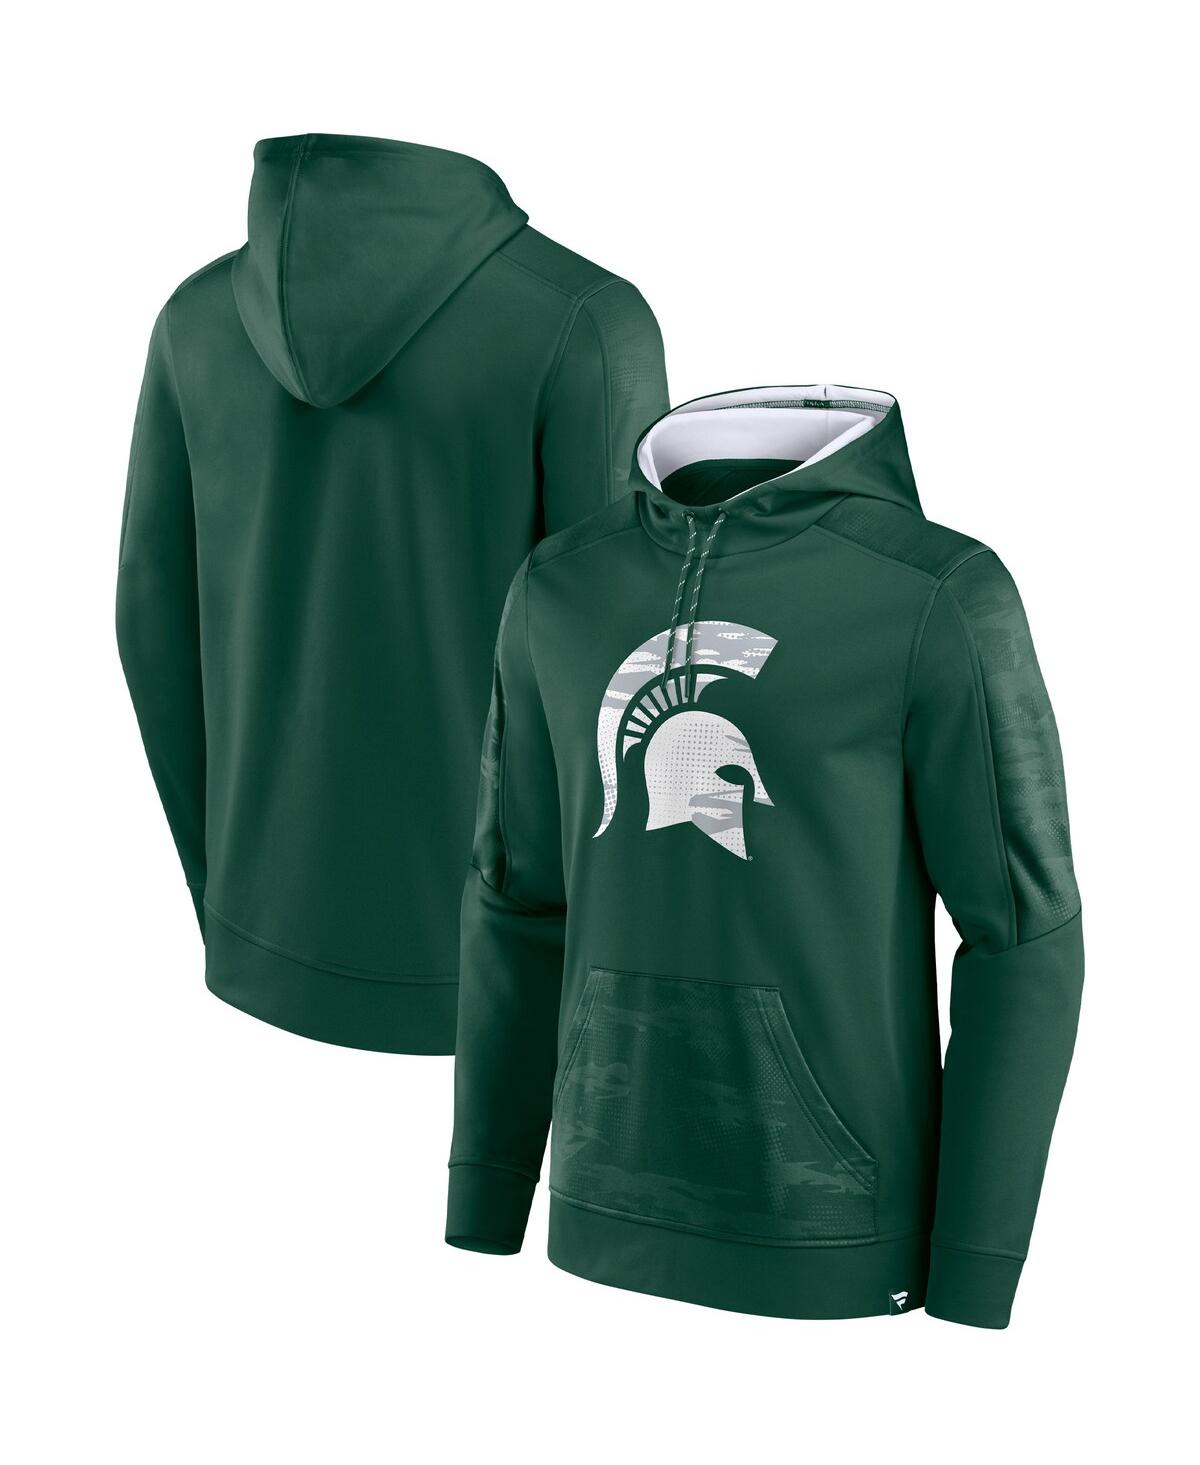 Fanatics Men's  Green Michigan State Spartans On The Ball Pullover Hoodie